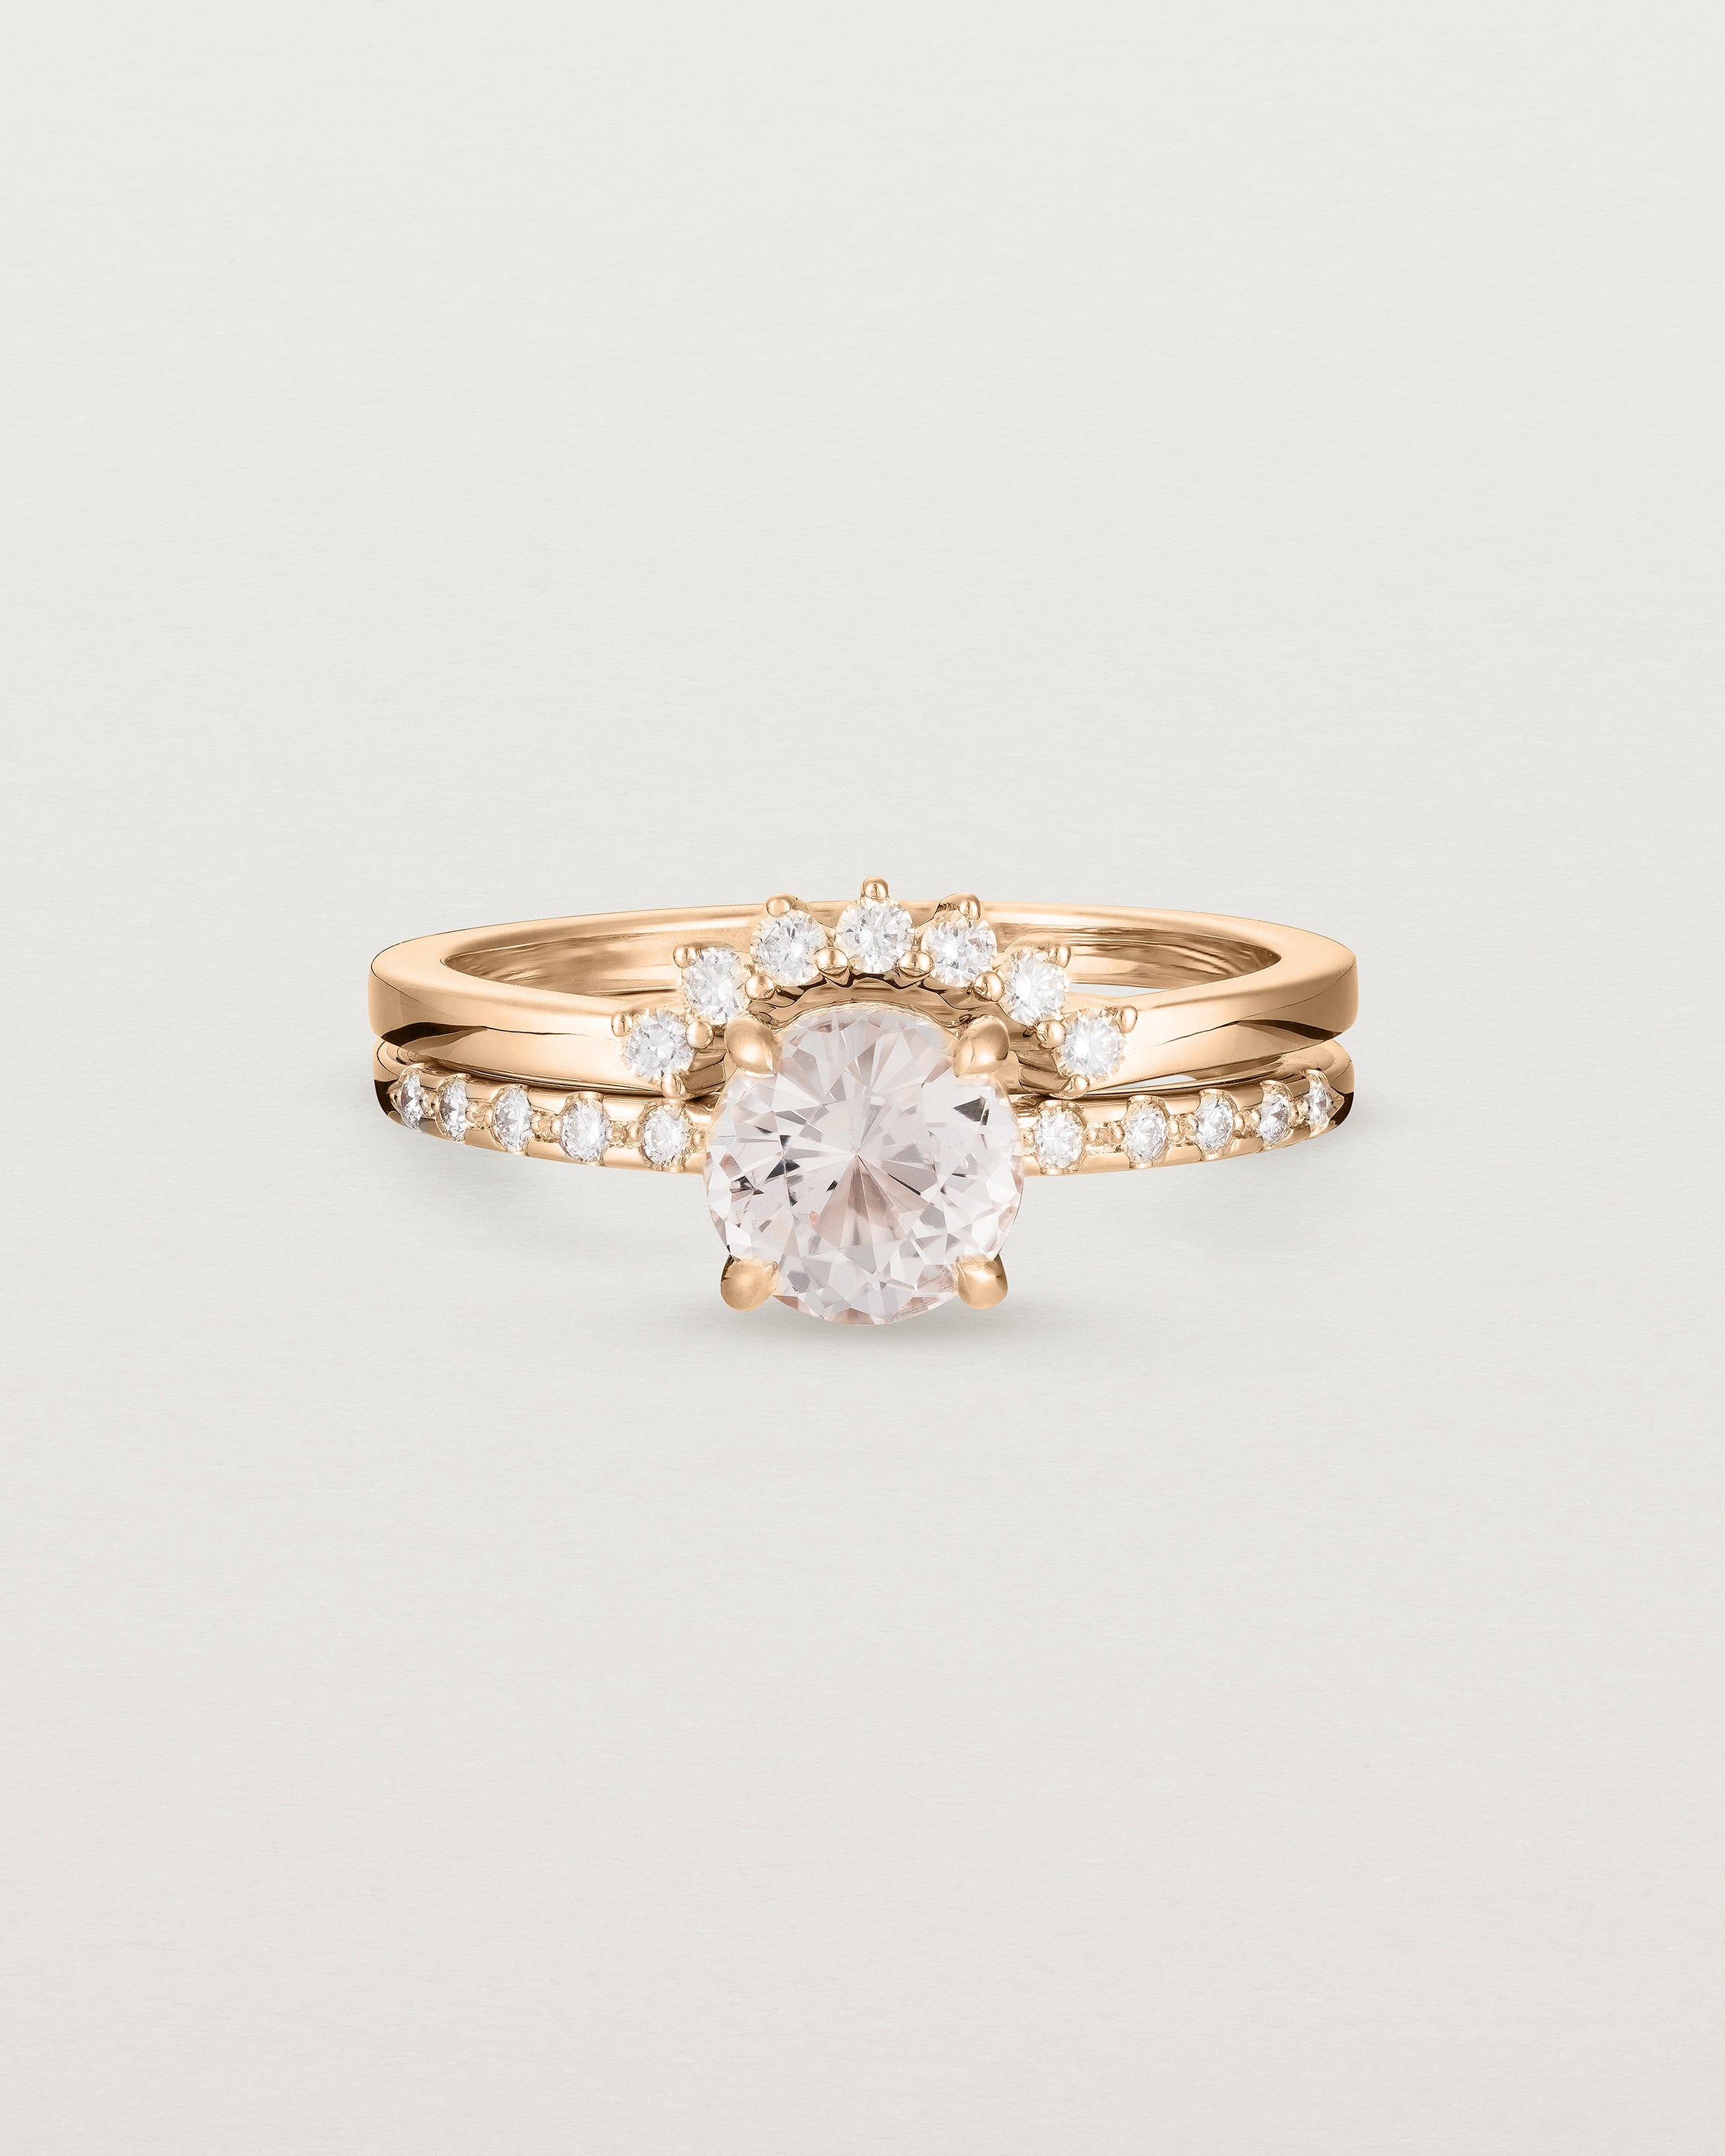 The Petite Una Round Solitaire | Morganite with Cascade Shoulders, stacked with the Reina Crown Ring | Diamonds in Rose Gold.